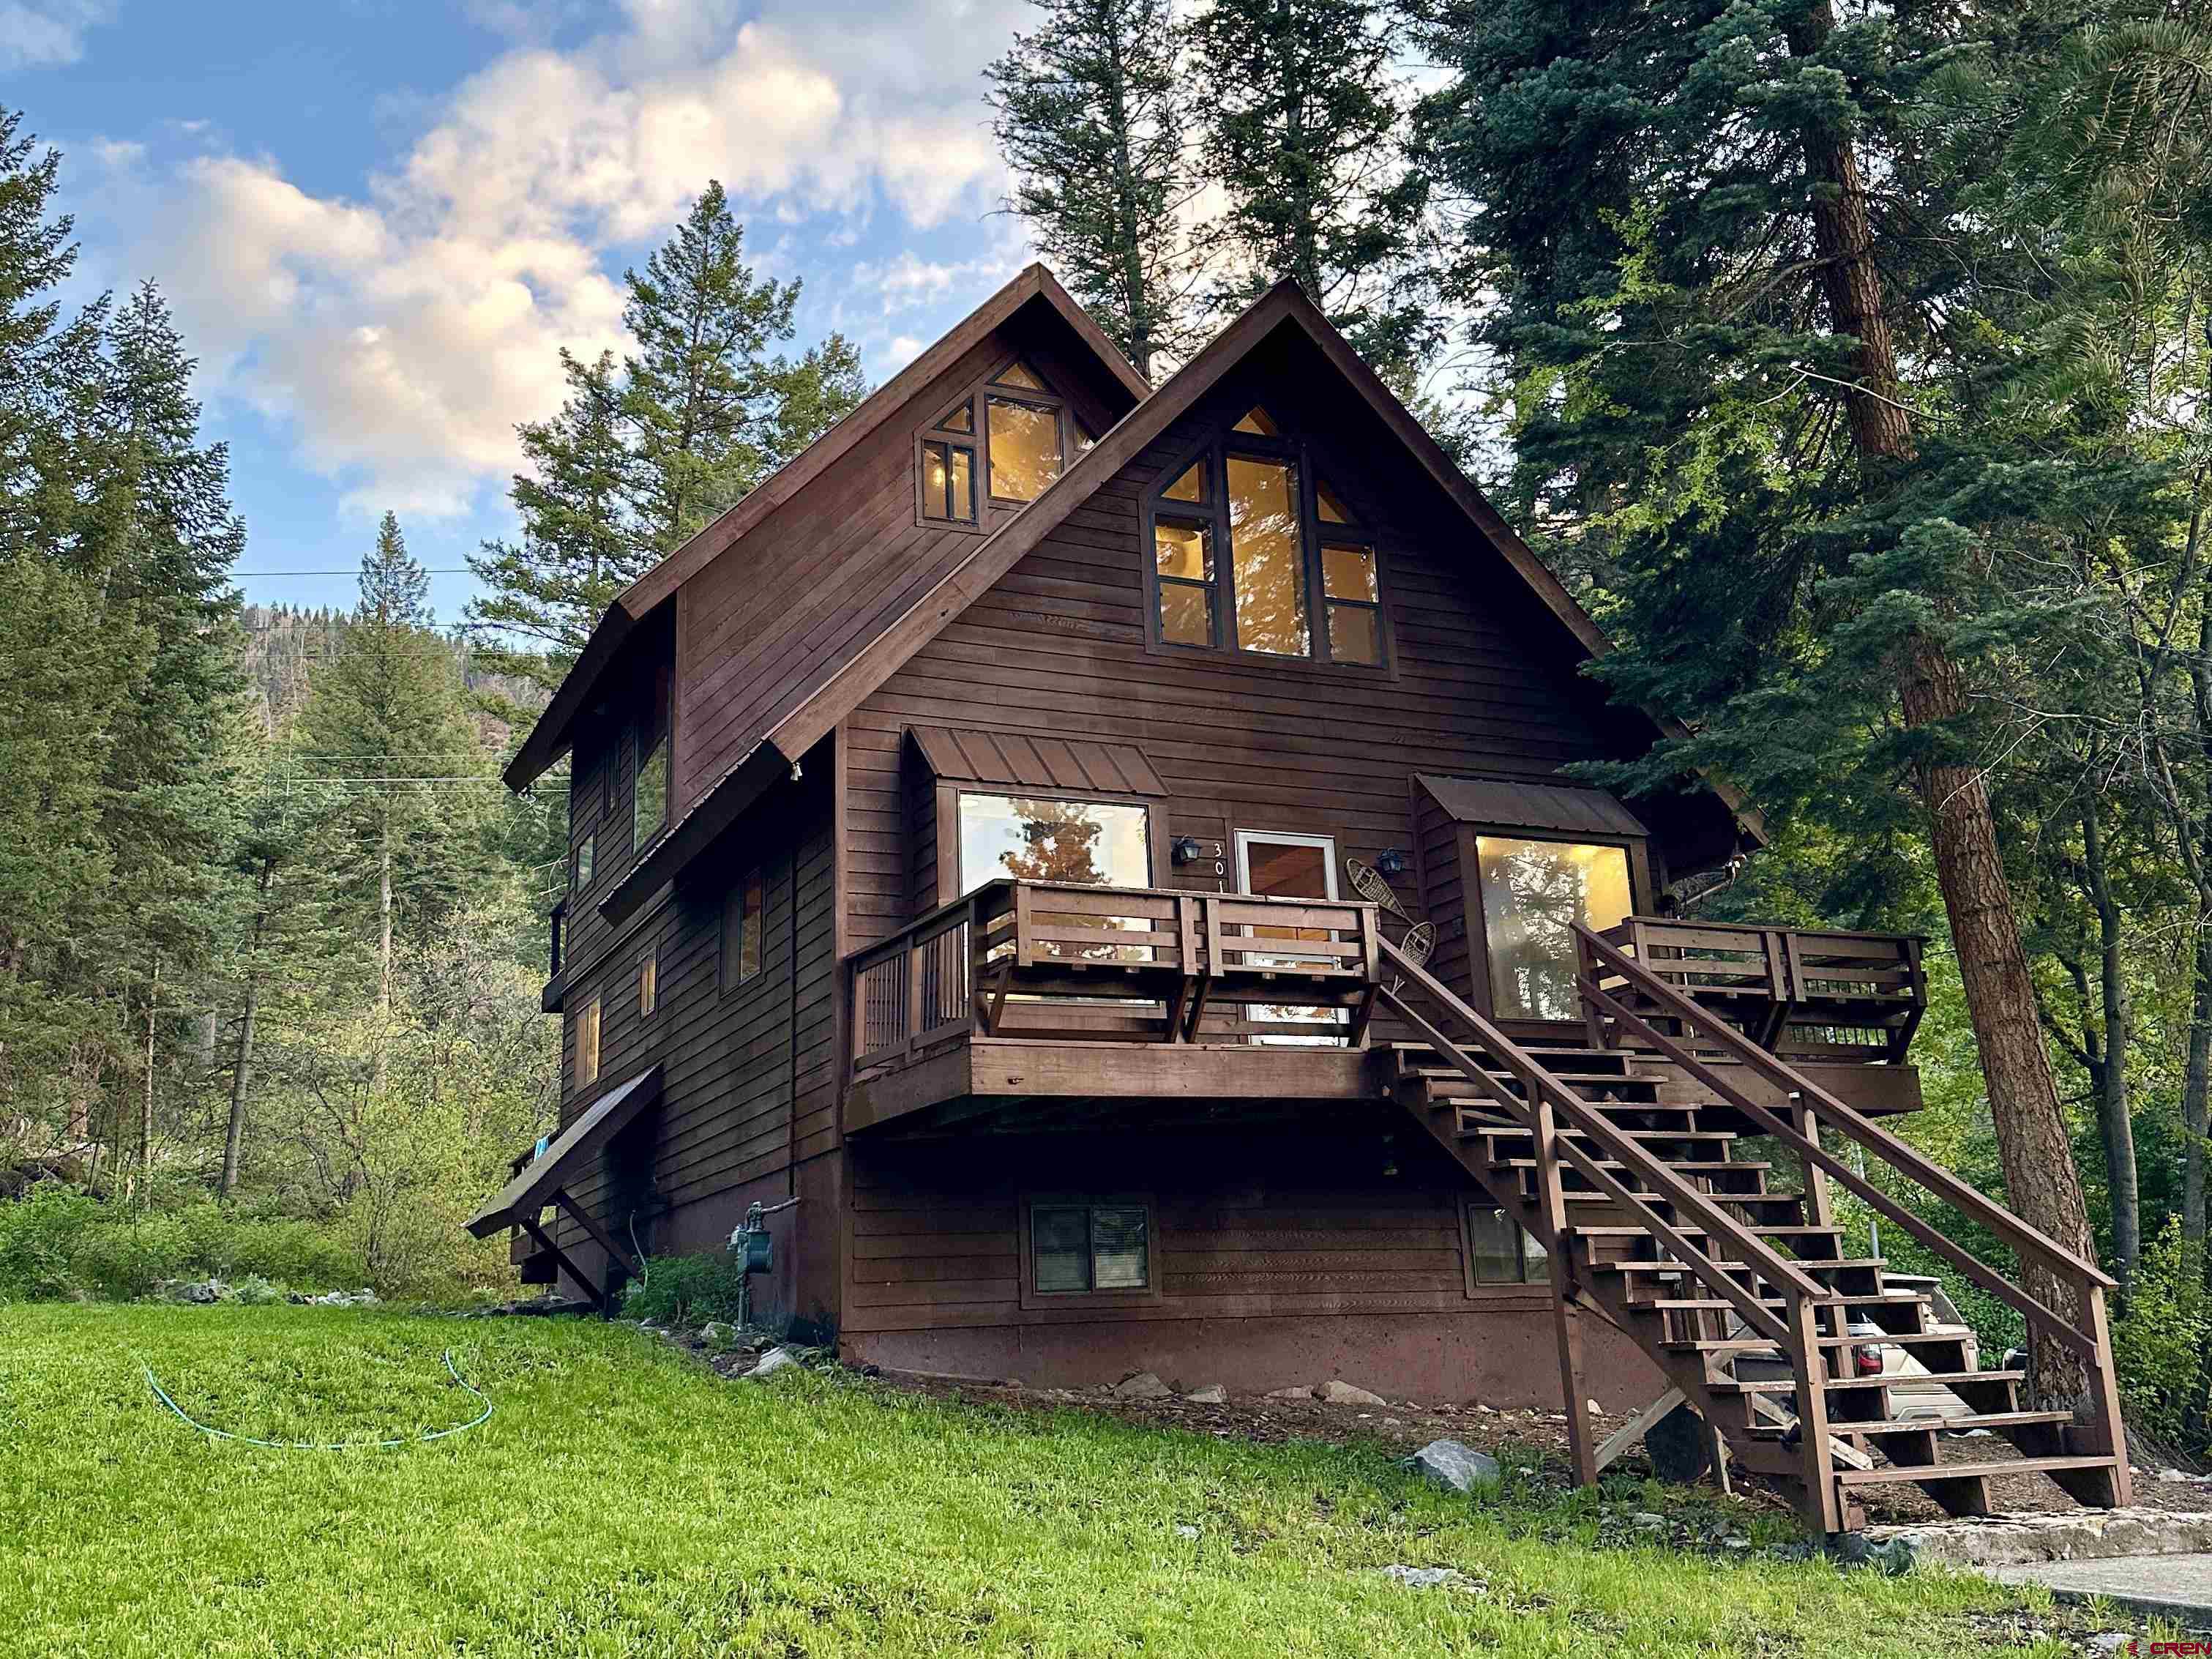 This amazing mountain home is located just outside of the city of Ouray (1.7 miles to the pool and downtown). Move in to this stunning residence, or utilize it as a vacation home/short-term rental. Located in Ouray County, just across the county/city line, this comes with a TRANSFERABLE SHORT TERM RENTAL PERMIT! Having this transferable permit opens up so many options for the next owner, as there is currently a 5-year waiting list in Ouray County to access a new short term rental permit. The permit for this property is #007. The property is entirely turn-key, and can be immediately utilized as a short term rental if desired. Tucked in amongst towering pine trees, this property provides privacy and and an amazing, peaceful environment. Enjoy the outdoors from the front deck, back deck, or private balcony deck off of the primary room. Completely renovated top to bottom in late 2022! The home, which is being sold furnished, features all brand new beds and bedding, luxe linens and towels, a fully stocked kitchen, a cozy pellet stove, and so much more. The loft bedroom has tons of natural light from 10 ft windows and a king size bed, a cozy leather lounging chair, and beautiful views. The primary bedroom features a king size bed, TV, a vanity & sink, and exclusive access to a private upper balcony deck via wall-to-wall sliding glass doors. Wake up looking straight out into the stunning wilderness! The "bunk room" is spacious and has two queen beds and a set of twin bunk beds. This room also has amazing 10 ft windows to gaze out into the pines from. The lower level bedroom features a plush queen bed and is on the walk-out basement level. There is a full bathroom on the walk-out basement level, a full bathroom on the upper level near the primary and bunk rooms, and there is a half bath on the main level. The chef's kitchen is fully equip with everything you may need, and features a brand new high end 36' ZLine oven/range. Solid granite countertops and a modern backsplash bring both form and function to the kitchen. There is high end cutlery, professional grade pots and pans, and plenty of bakeware and chef's tools included. Sliding glass doors walk out to the back deck from the dining/kitchen area. The living room features a 55' TV, a cozy pellet stove, amazing window seats, and a high end italian leather couches. The ceilings in the living room and primary room are tongue and groove aspen, providing an amazing cozy-cabin feel. There is another small living area on the walk-out basement level complete with a wet bar, beverage refrigerator/freezer, a microwave, and more. This space has been a 1B/1B apartment in the past, and could easily be returned to that configuration with a few simple adjustments. It also has private exterior access. There is a full bathroom on the level of the home that features the primary bedroom and the bunk room. Brand new granite vanities have been installed in this bathroom and the primary bedroom. There is another full bathroom on the walk-out basement level, and a 1/2 bath on the main level near the living room.  The property is ideally located for those seeking peace and quiet but do not want to be far from town. Easily drive in for dinner and a soak at the hot springs, and then retreat to the serene peace that the woods provides. Ouray is known as "The Switzerland of America" and attracts visitors from near and far, year after year. Don't miss out on all that this stunning home and community have to offer!